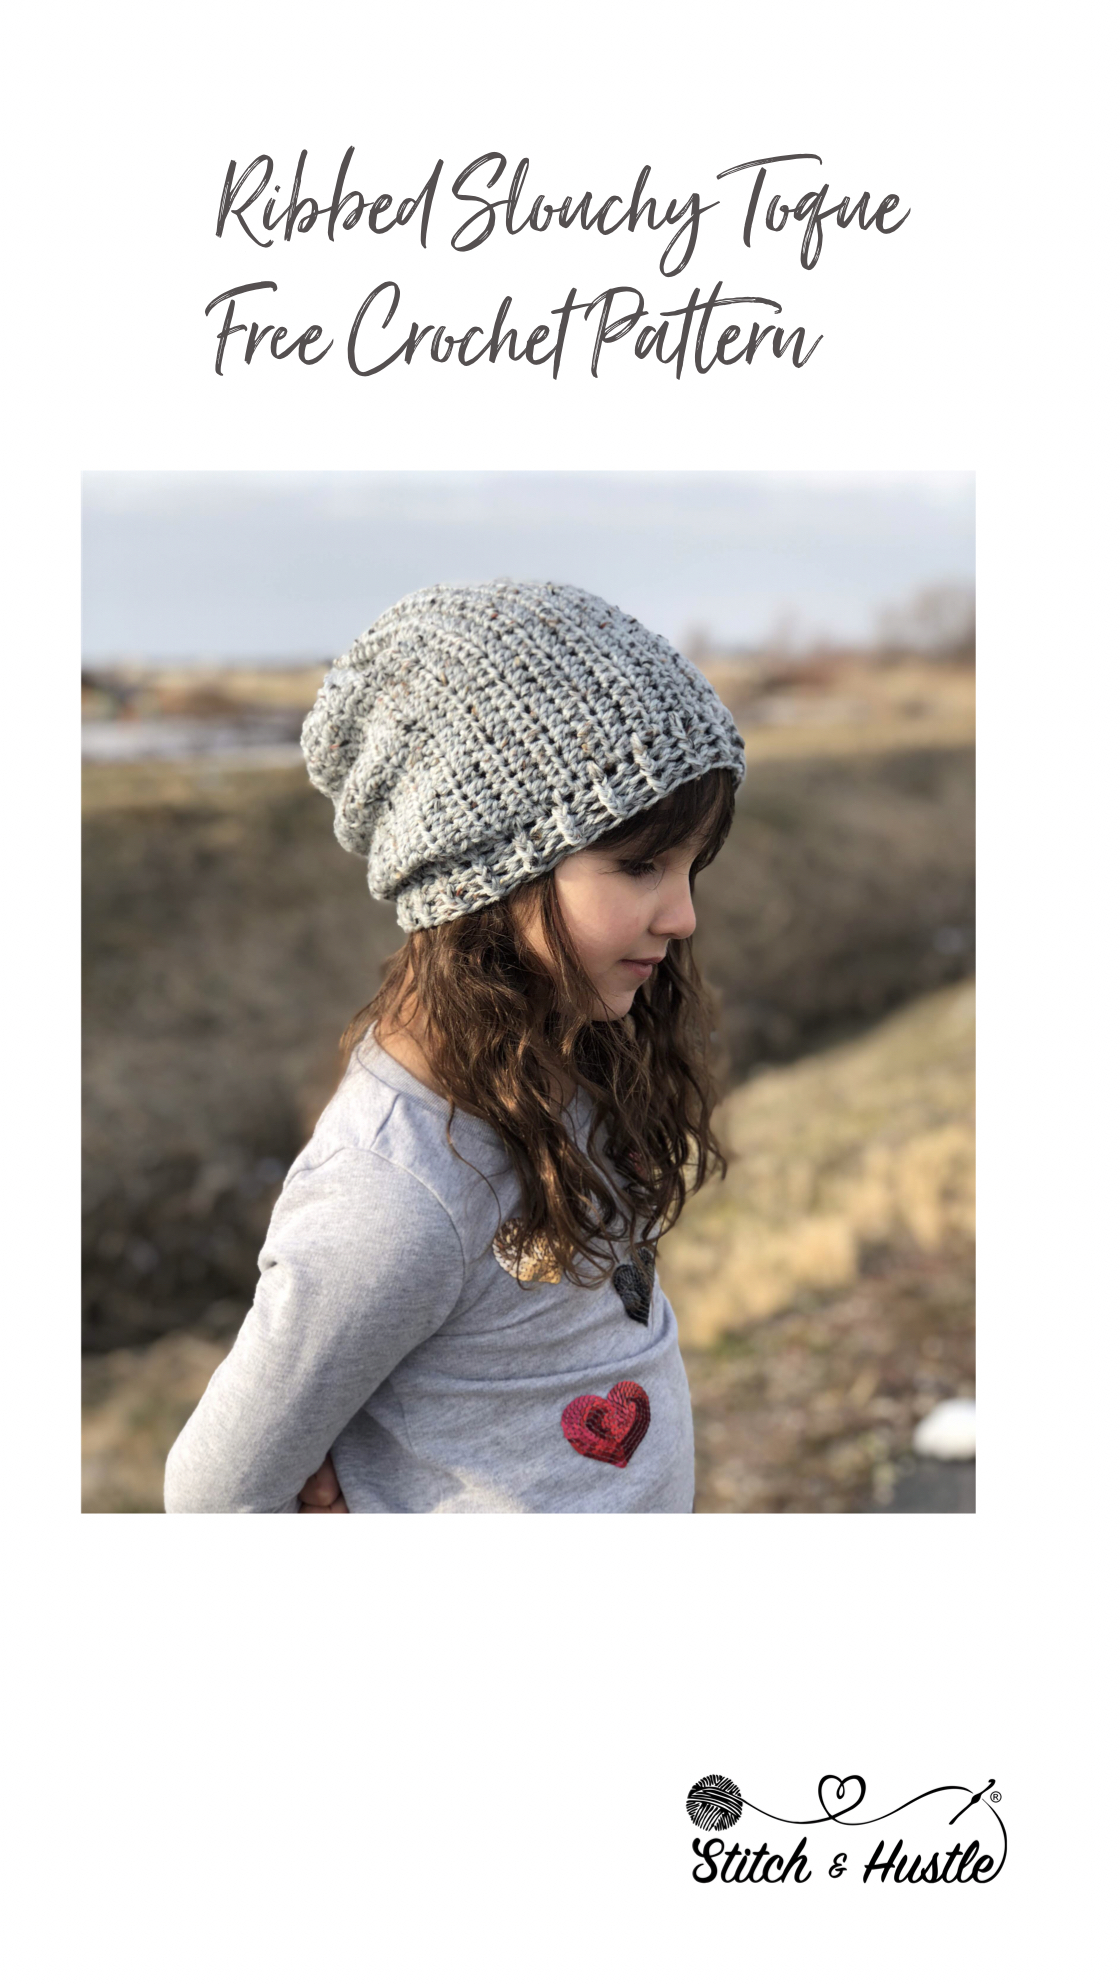 Pattern: The Basic Chunky Slouch - Evelyn And Peter Crochet